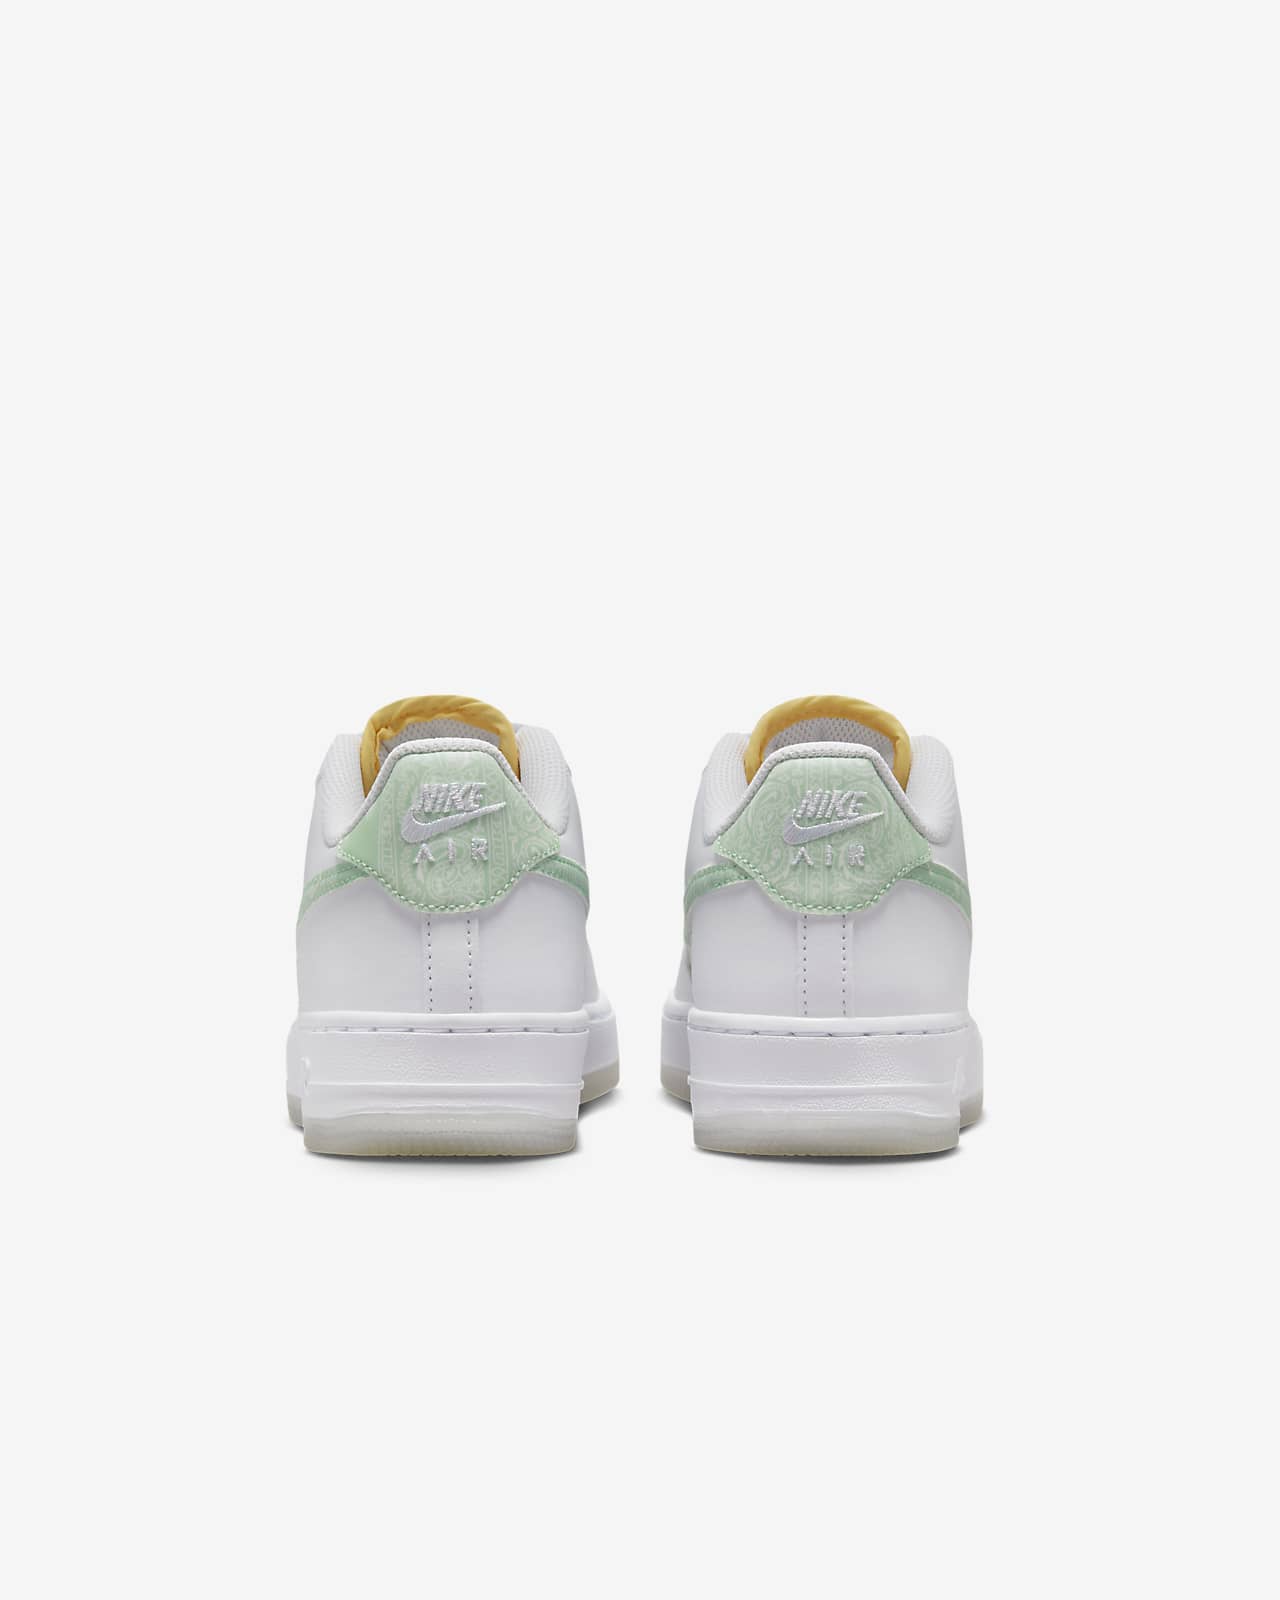 Nike Air Force 1 LV8 Big Kids' Shoes in White - ShopStyle